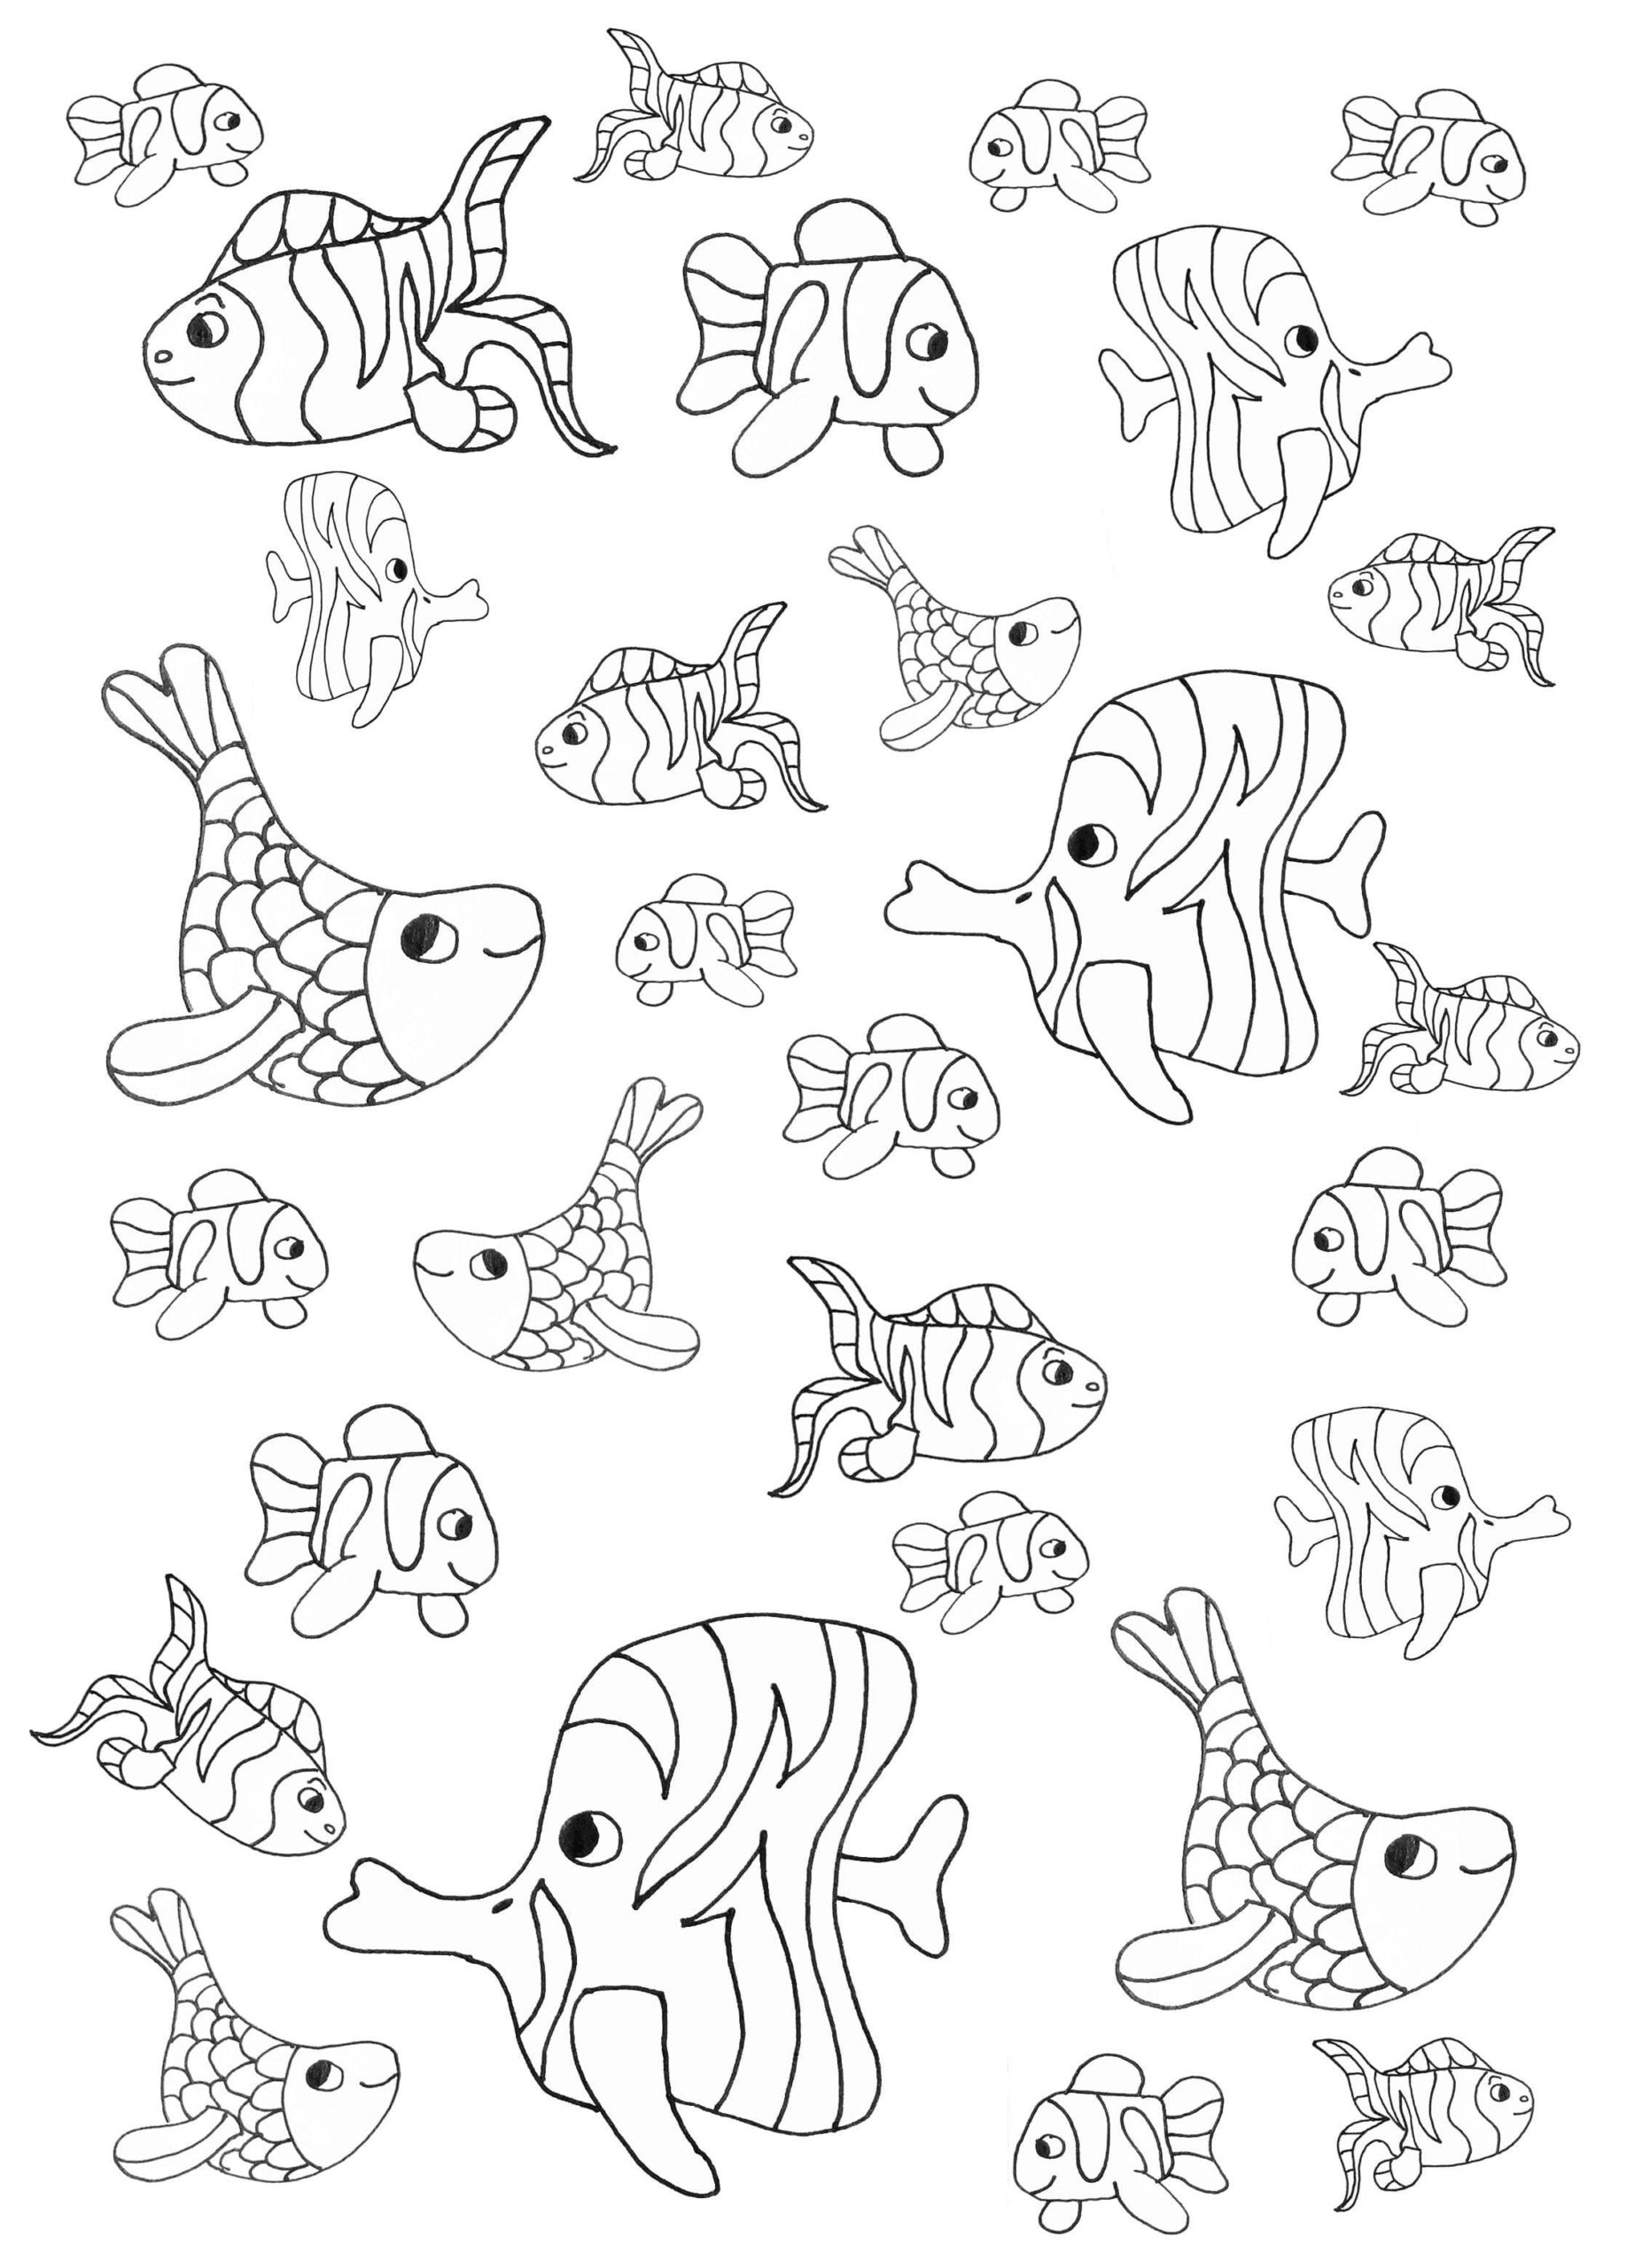 Poissons d’Avril coloring page